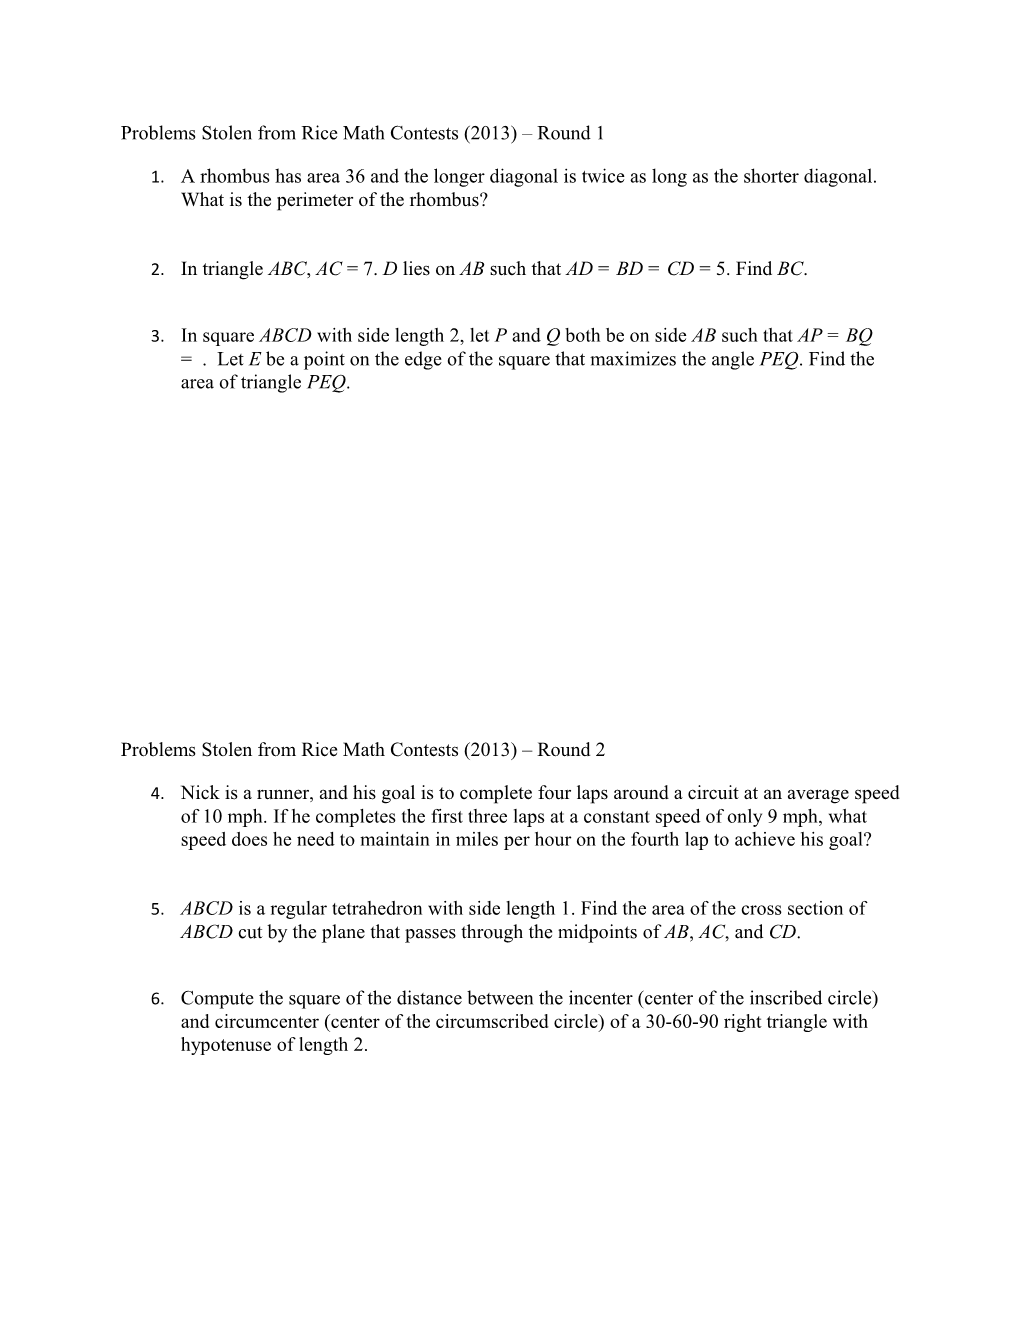 Problems Stolen from Rice Math Contests (2013) Round 1